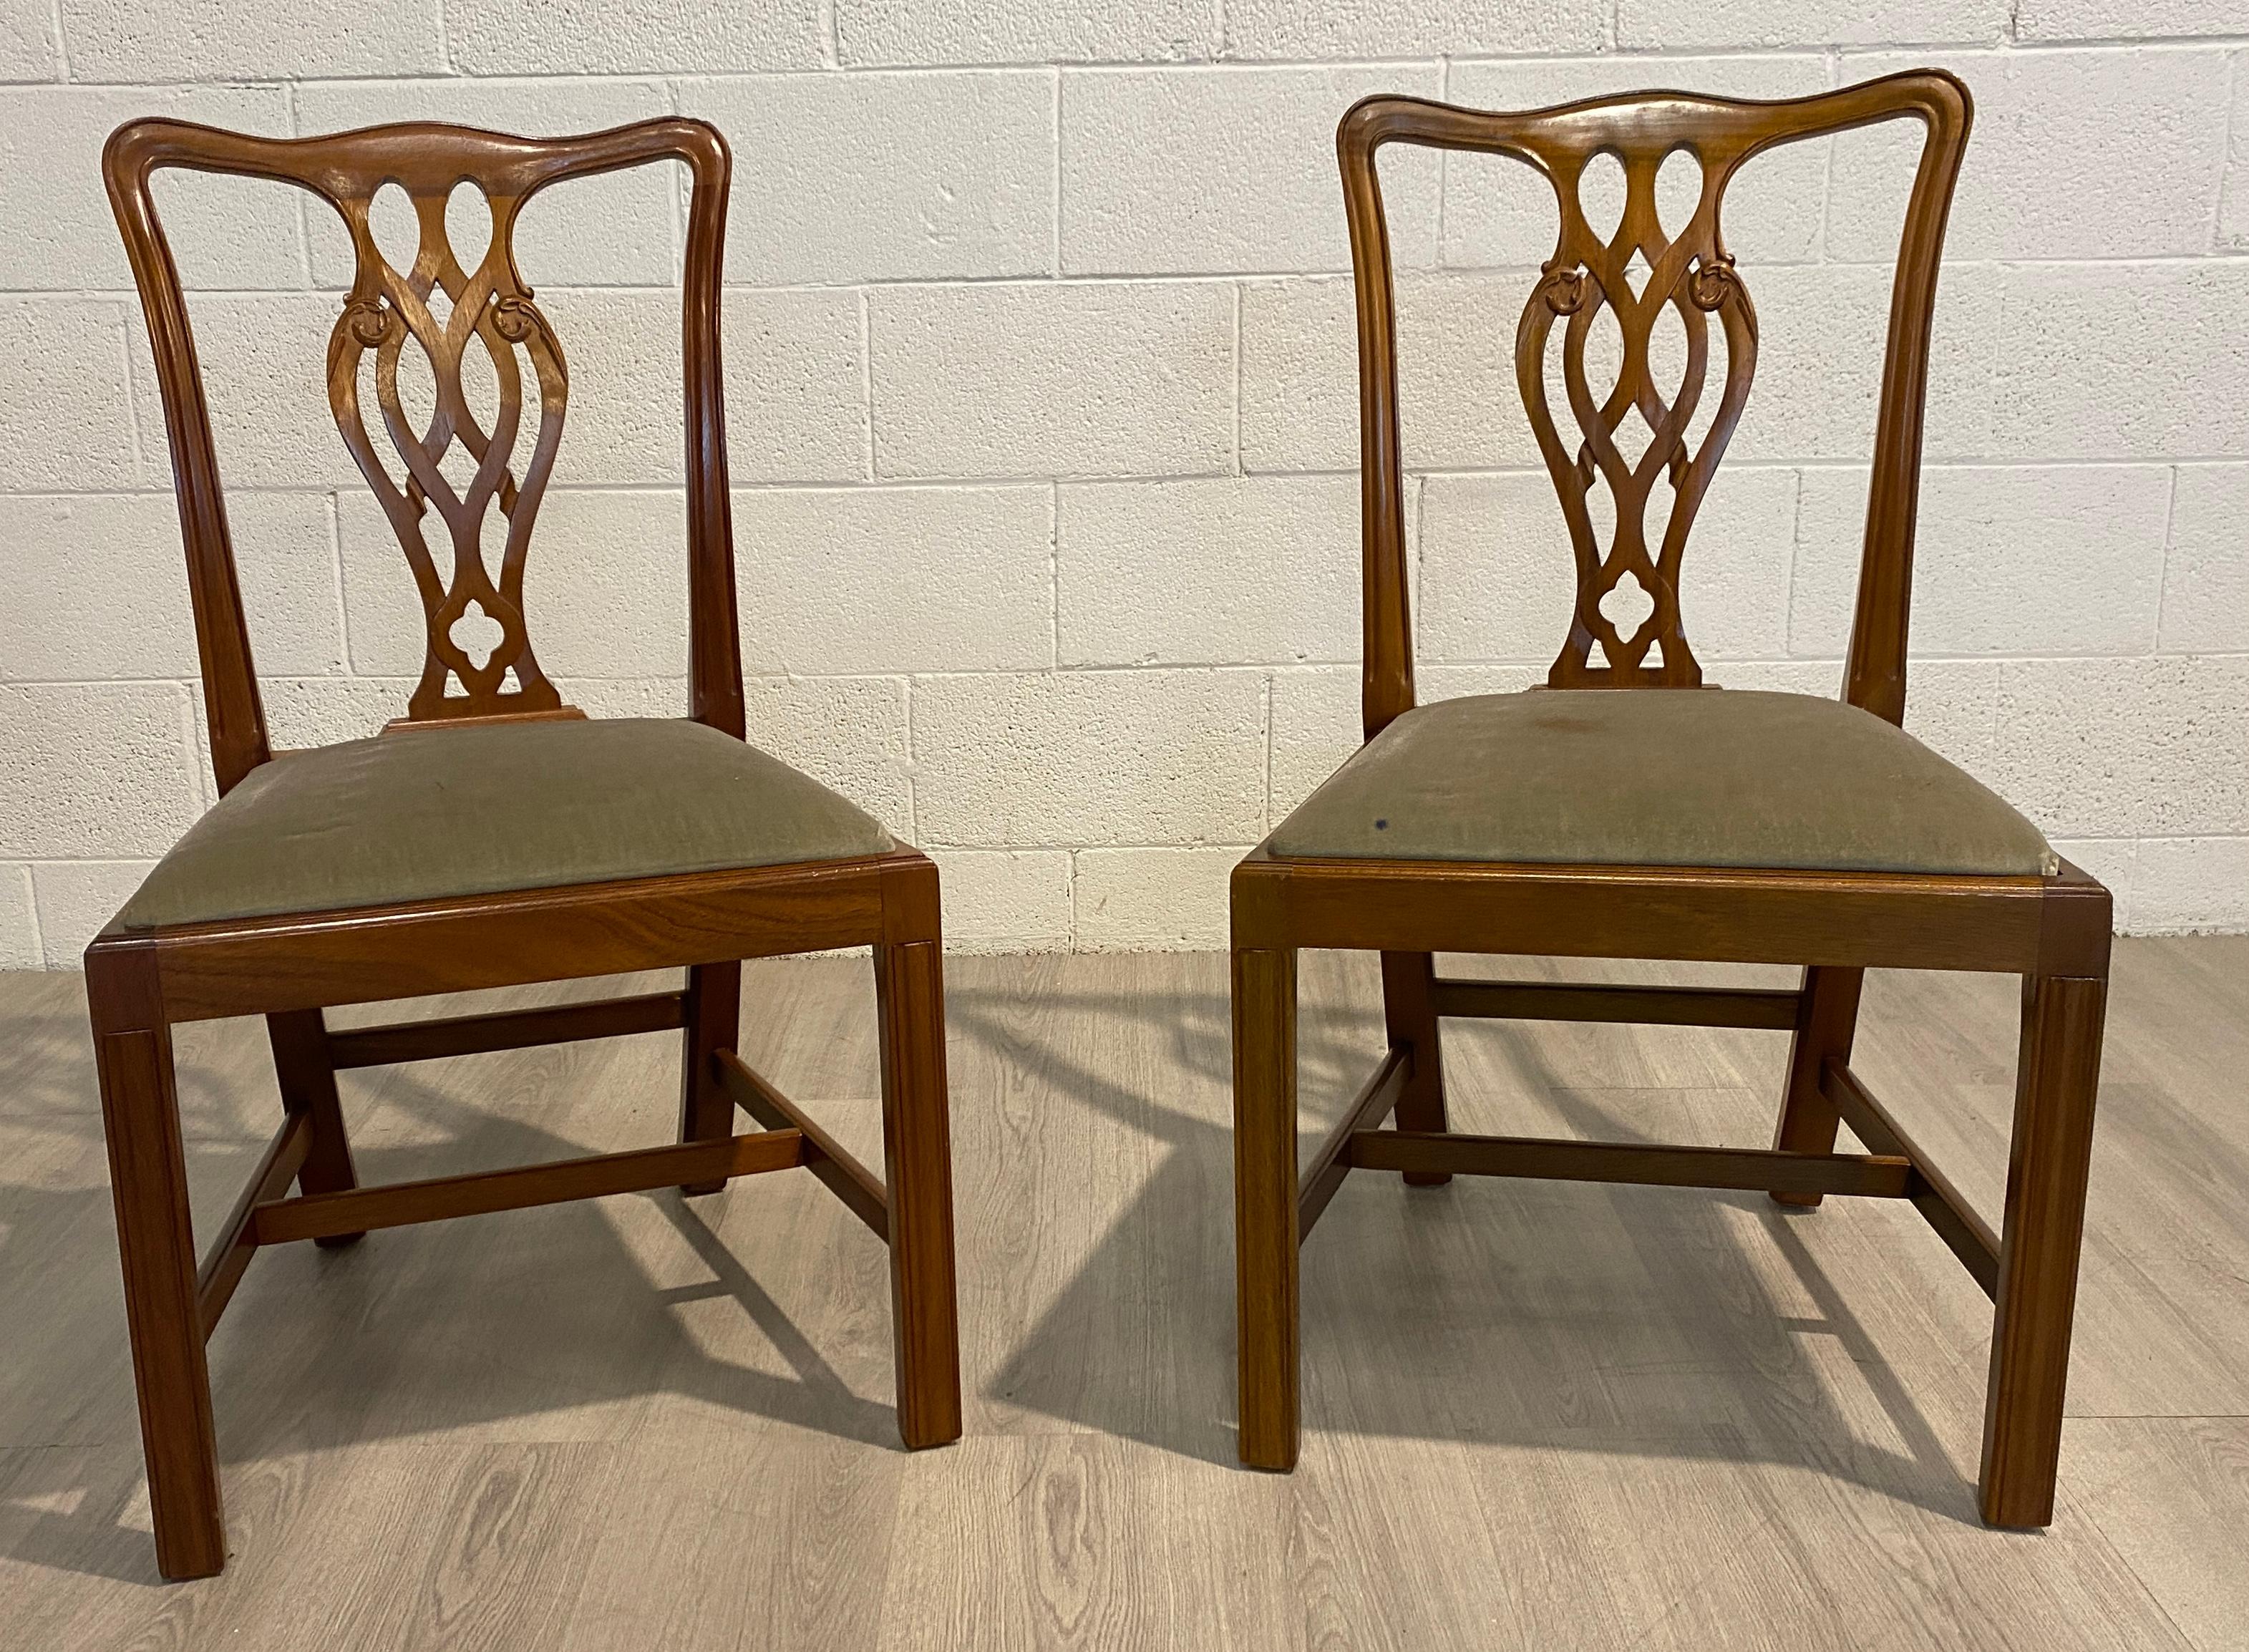 A solid pair Georgian style mahogany dining chairs made in England. The Chippendale style chairs are without arms. Upholstered in their original mint green cover with the pop out seats they can be easily renewed.